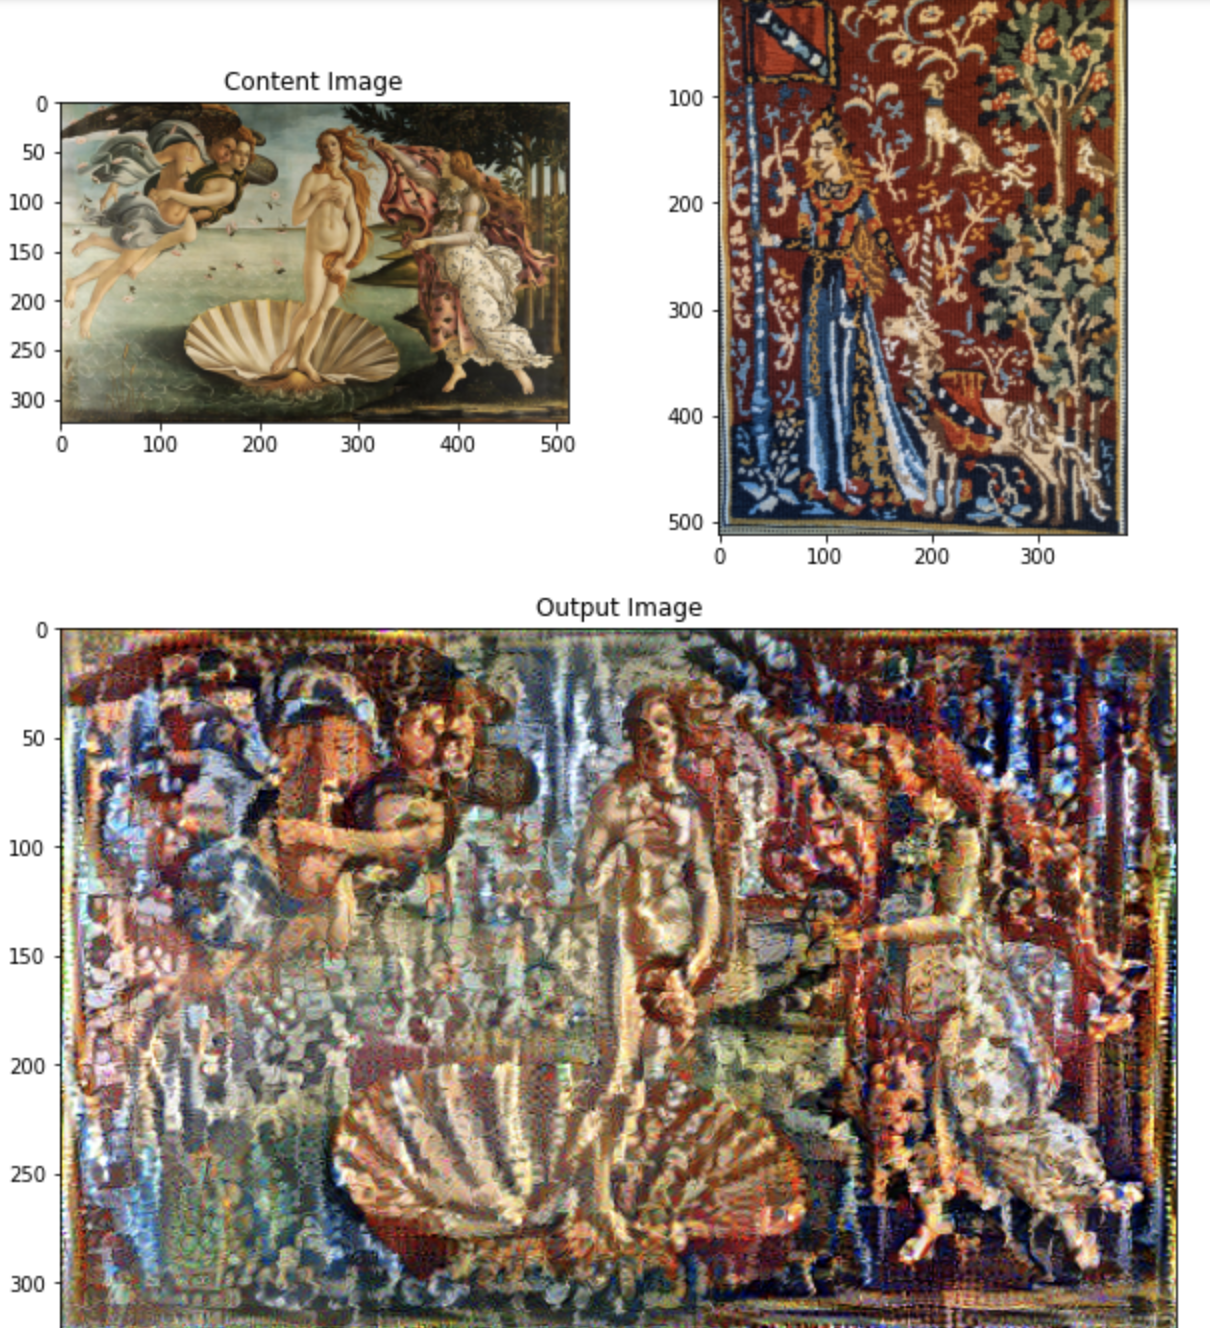 The Birth of Venus, but with a more tapestry-like look. Somewhat splotchy and blurry, lots of blues